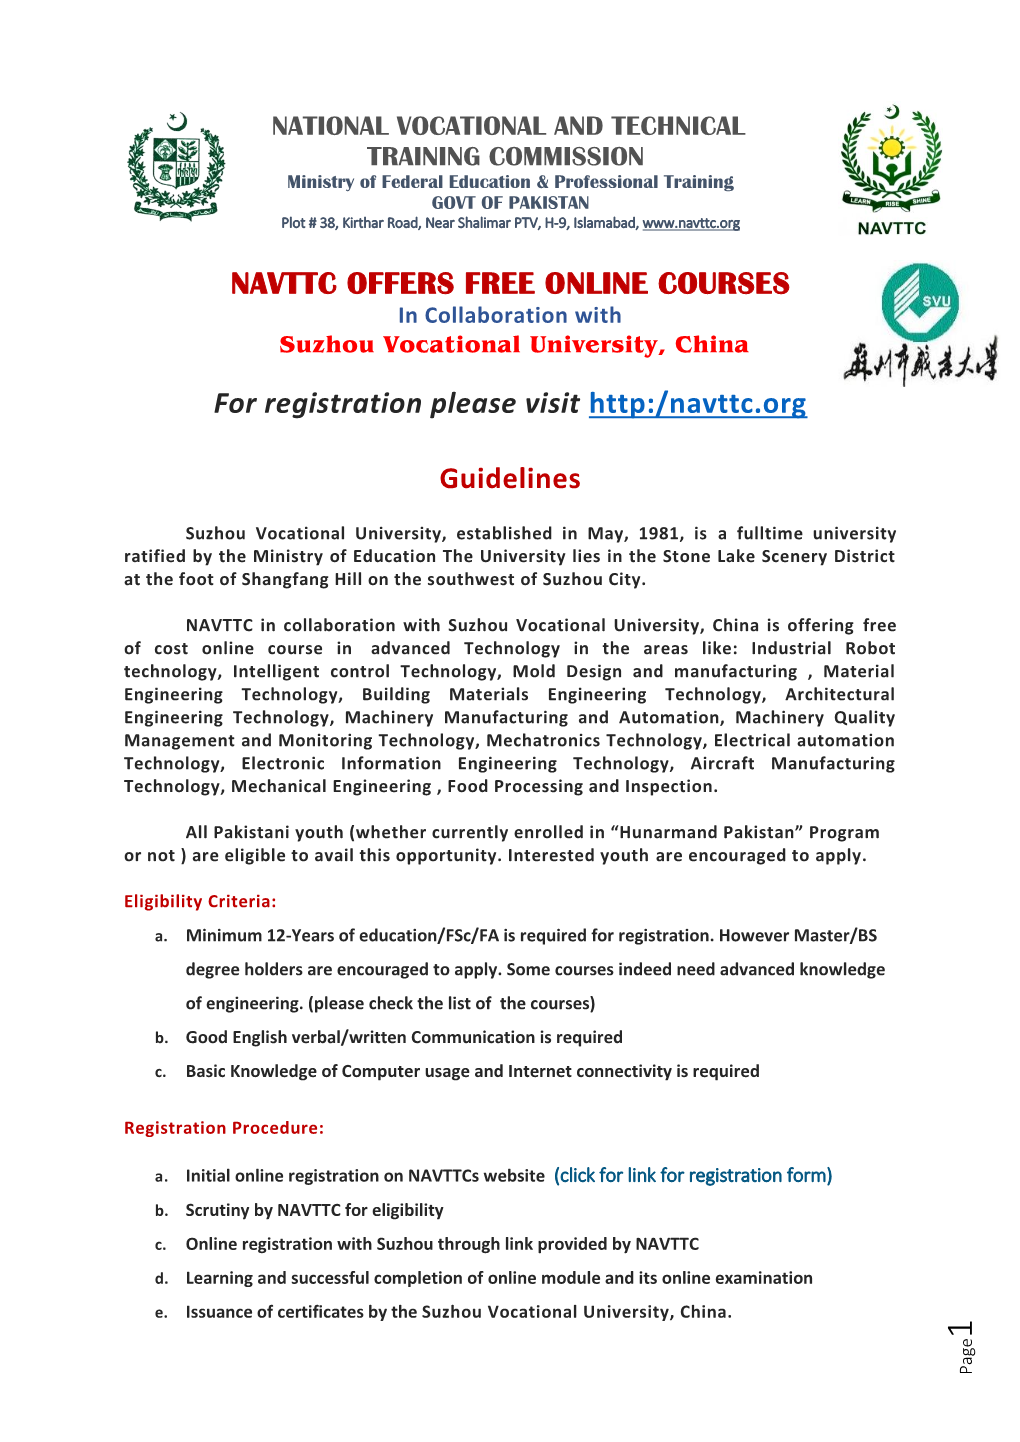 NAVTTC OFFERS FREE ONLINE COURSES for Registration Please